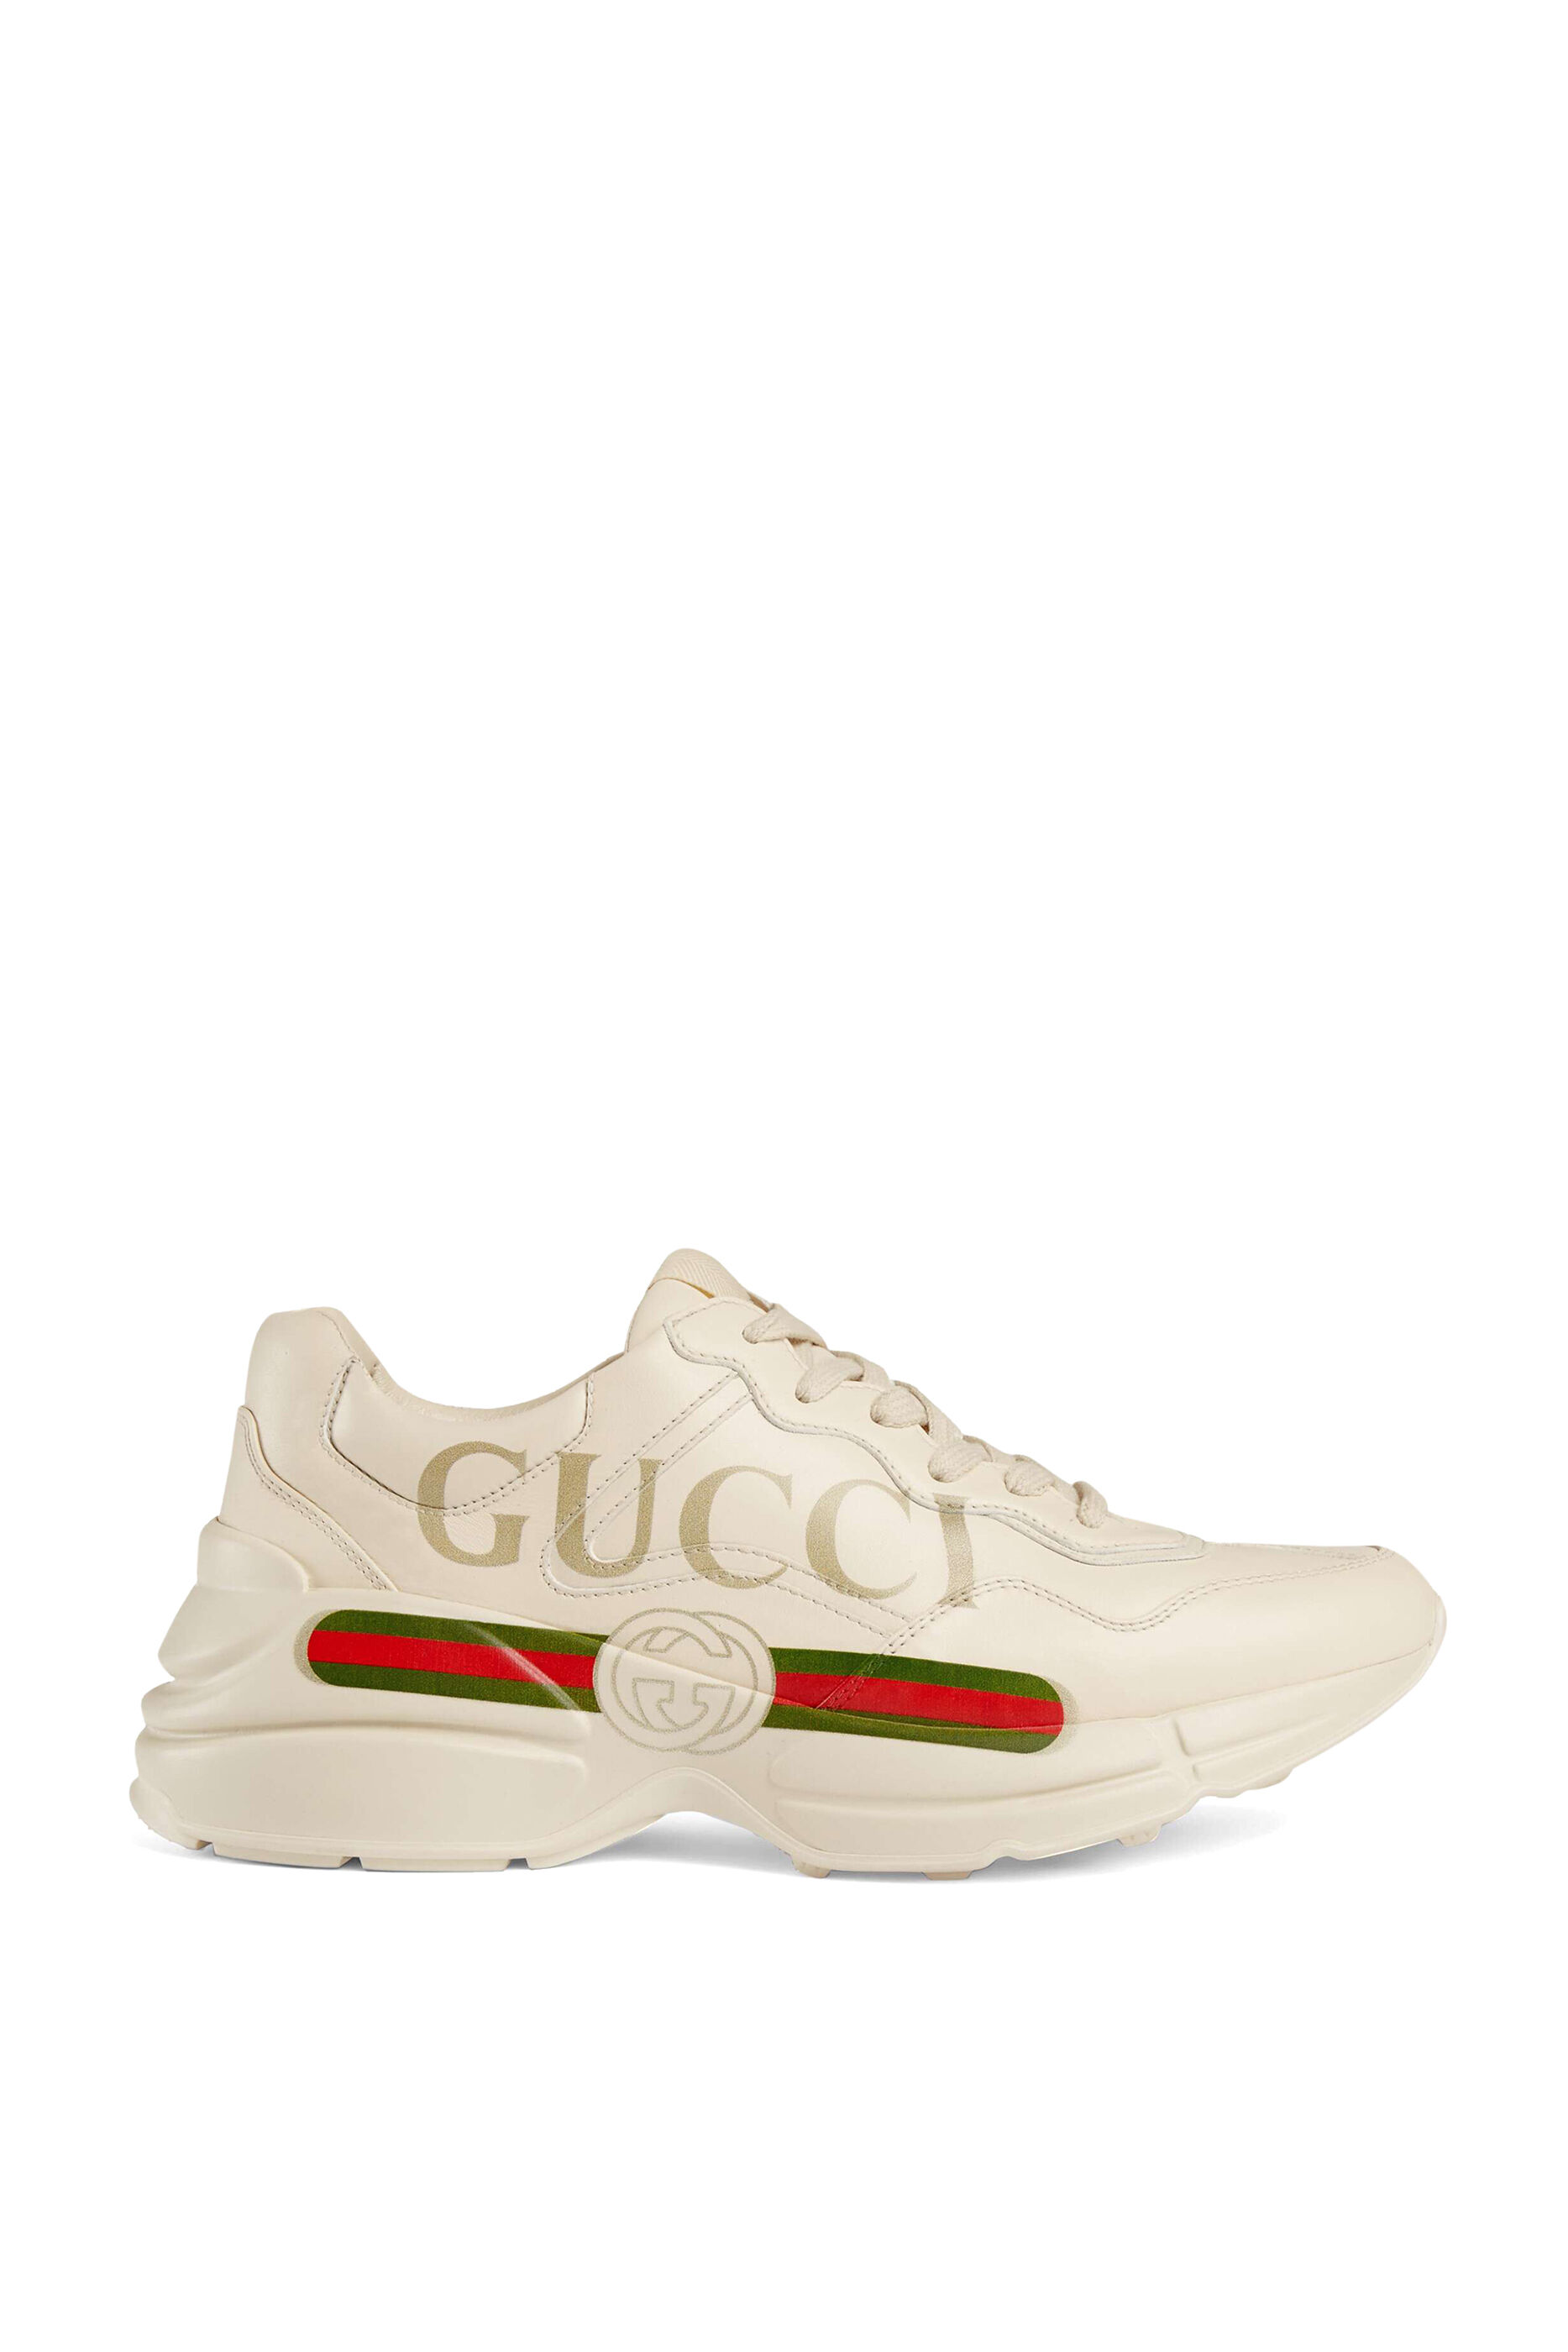 Buy Gucci Rhyton Logo Leather Sneakers 